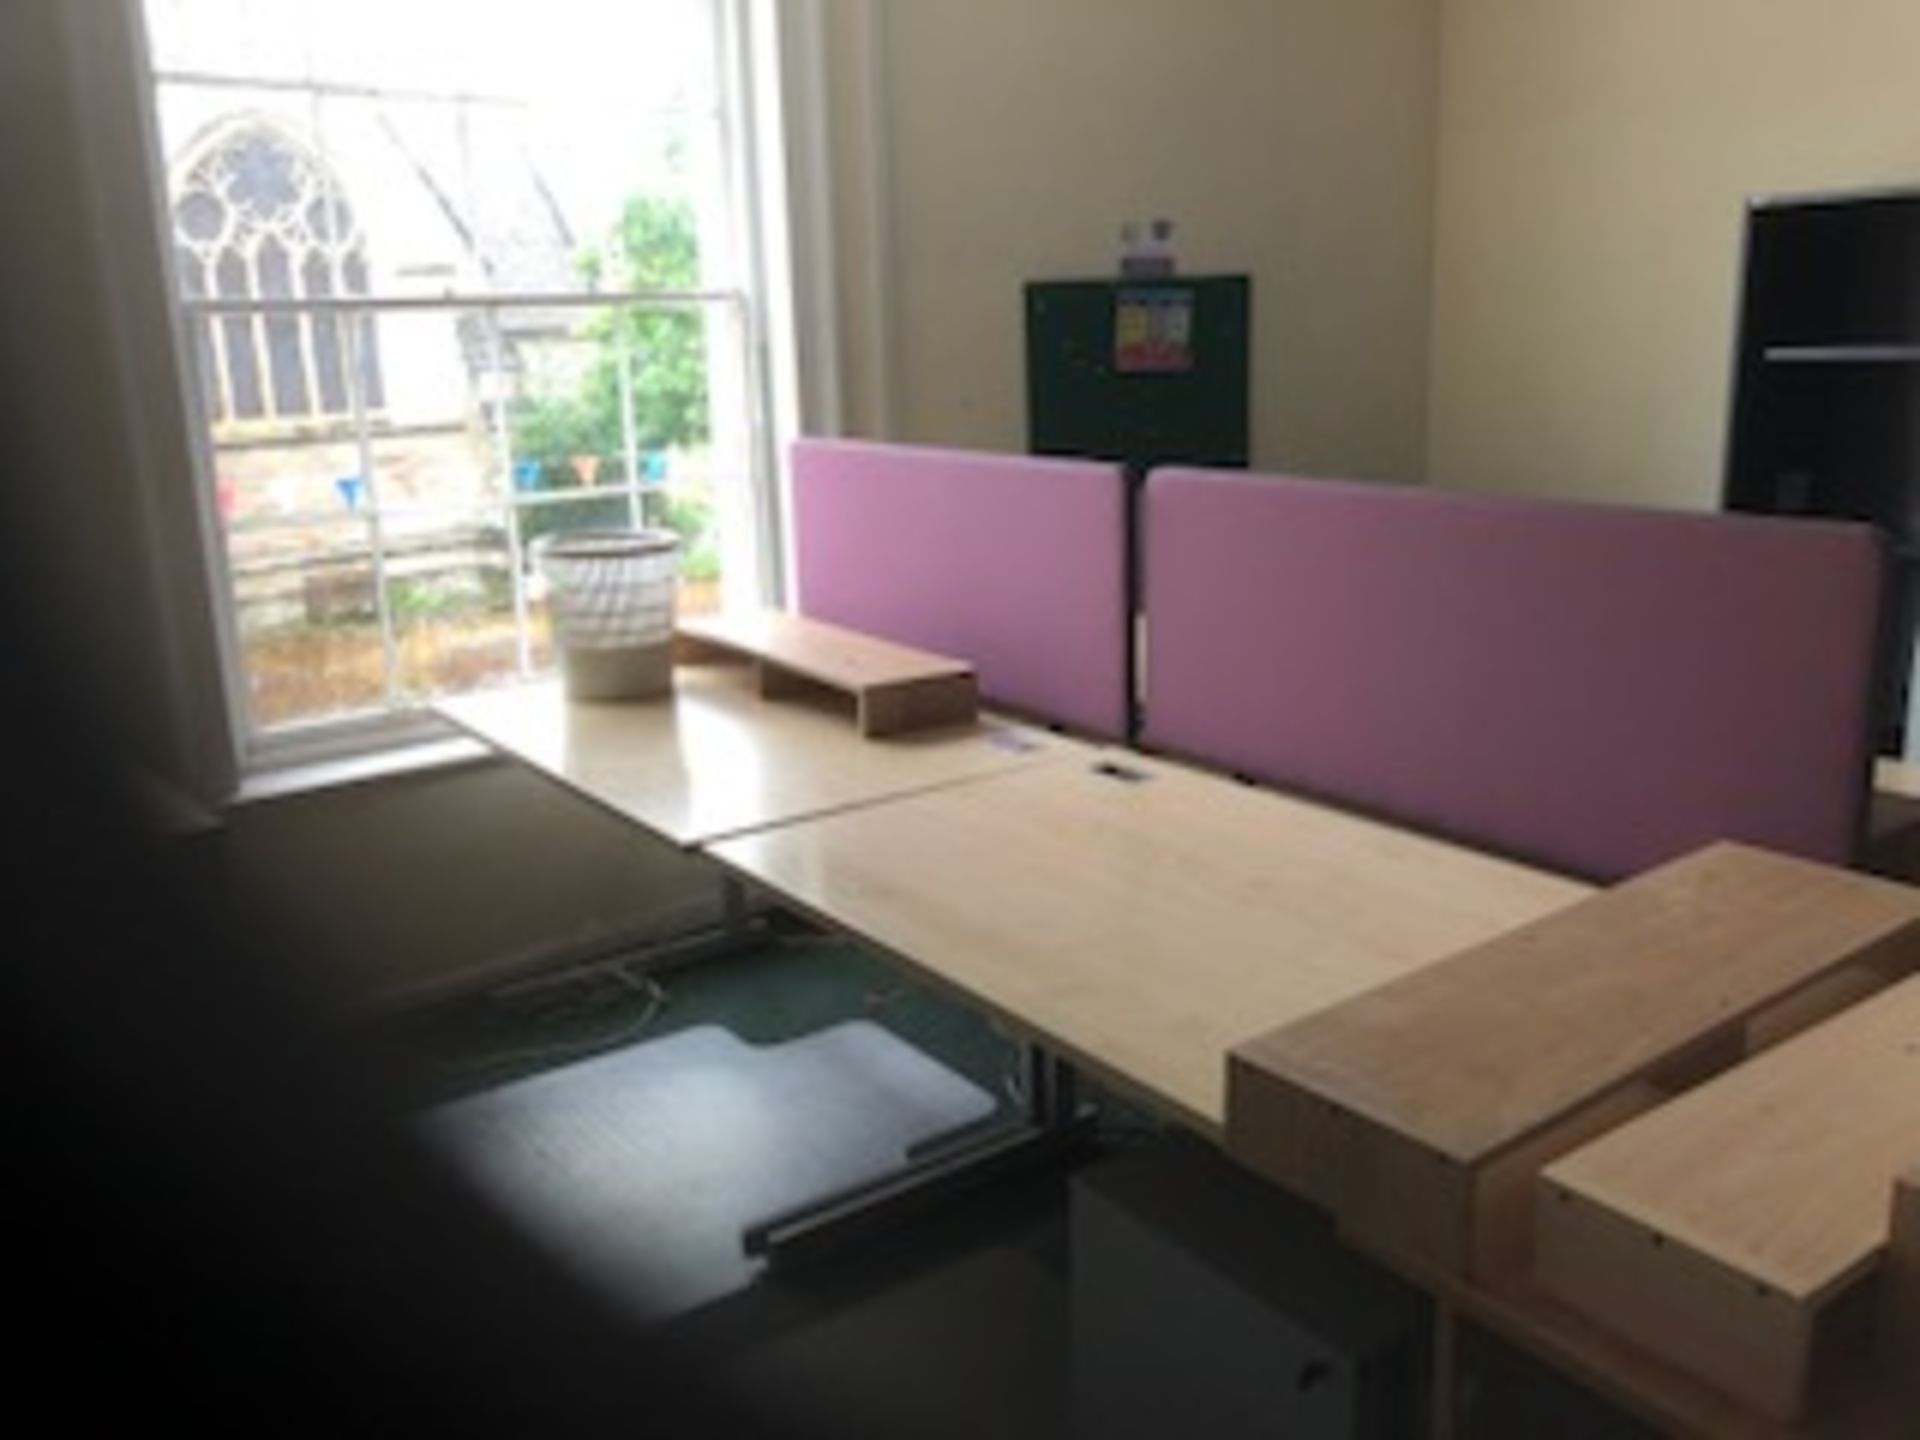 Office Desk in Light Wood – with Divider – Nice condition Available due to Office Re-Location - Image 2 of 3